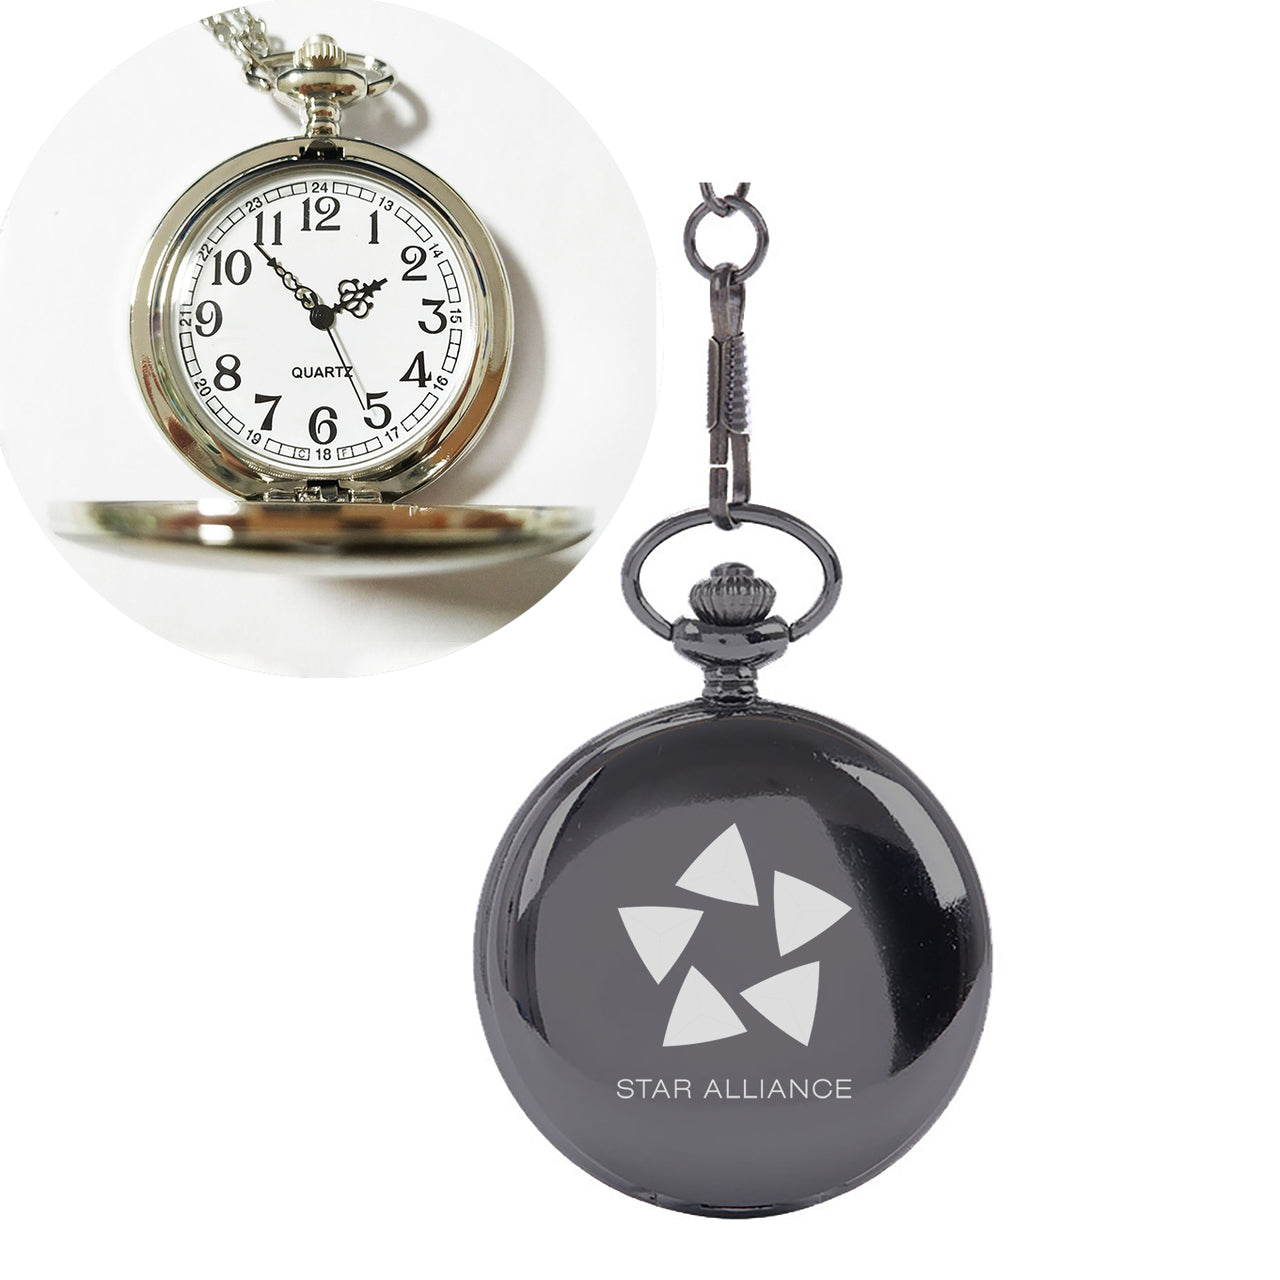 Star Alliance Airlines Designed Pocket Watches